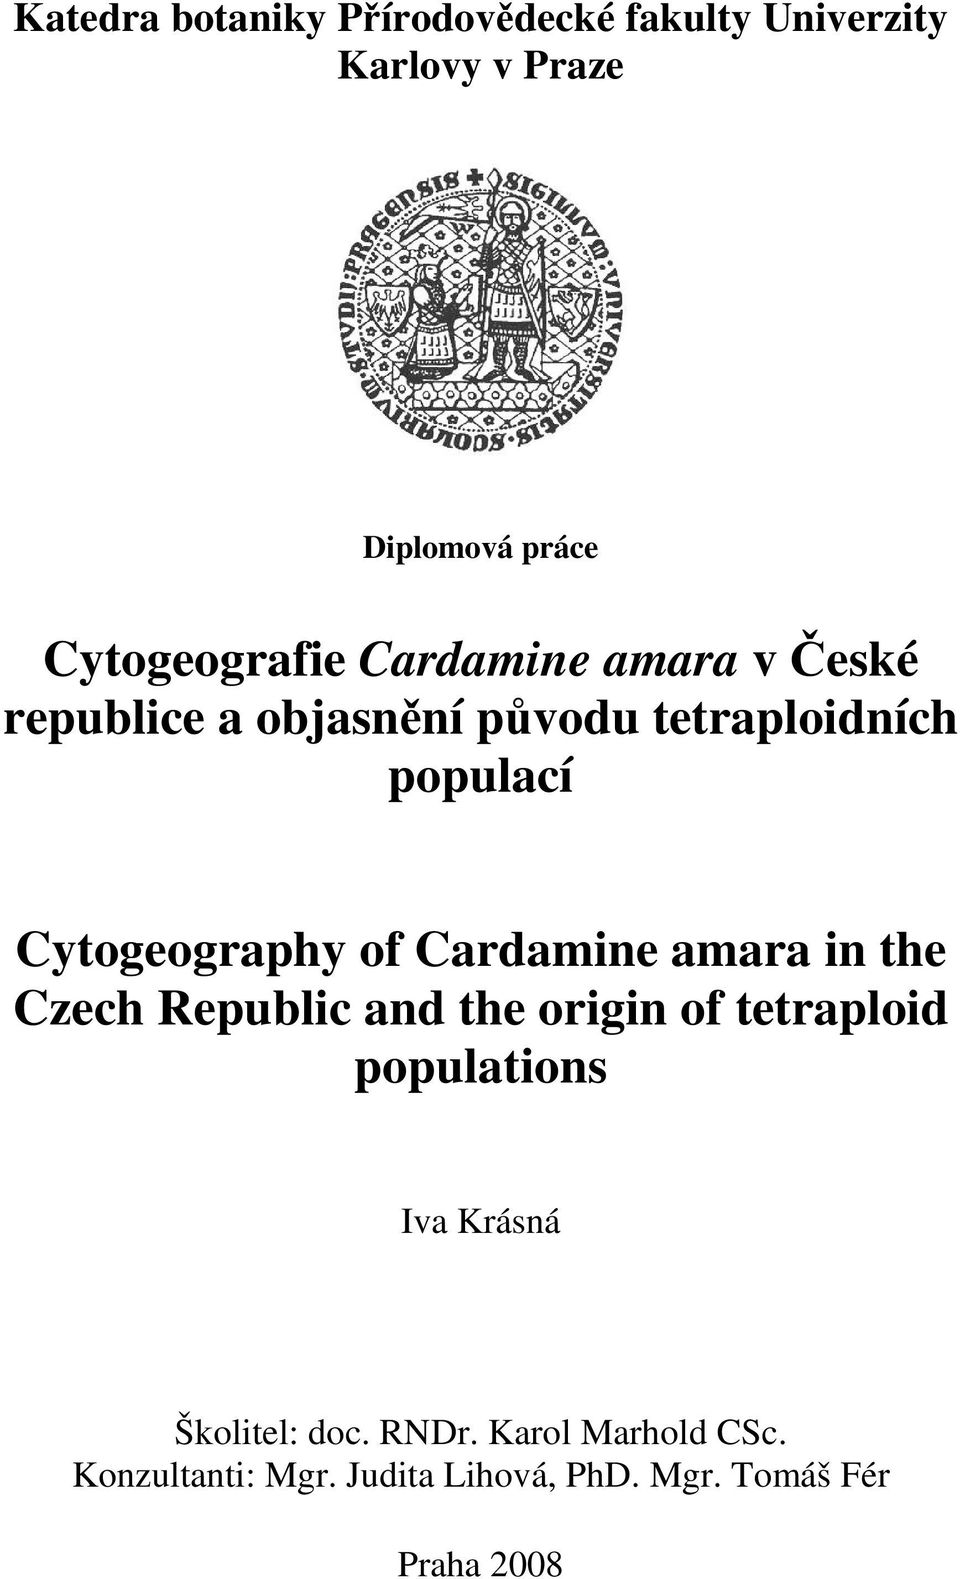 Cytogeography of Cardamine amara in the Czech Republic and the origin of tetraploid populations